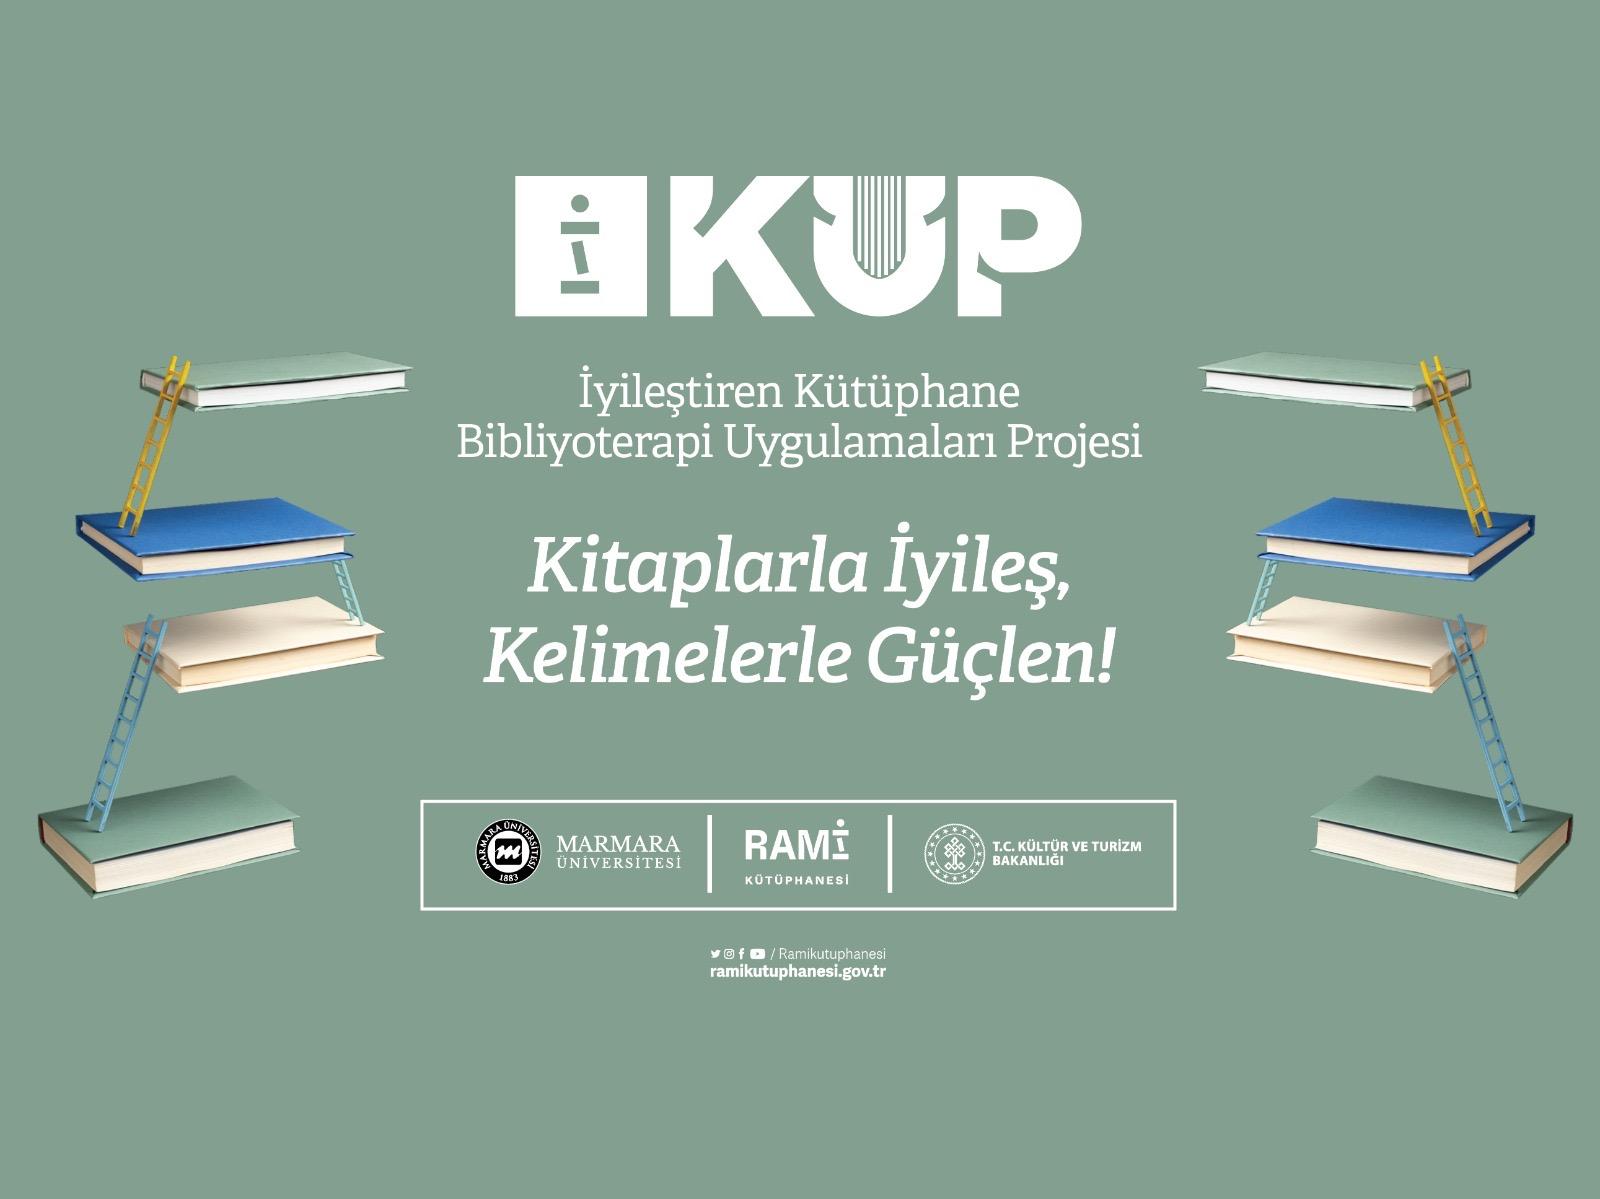 BIBLIOTHERAPY LIBRARY PROJECT (BLP)